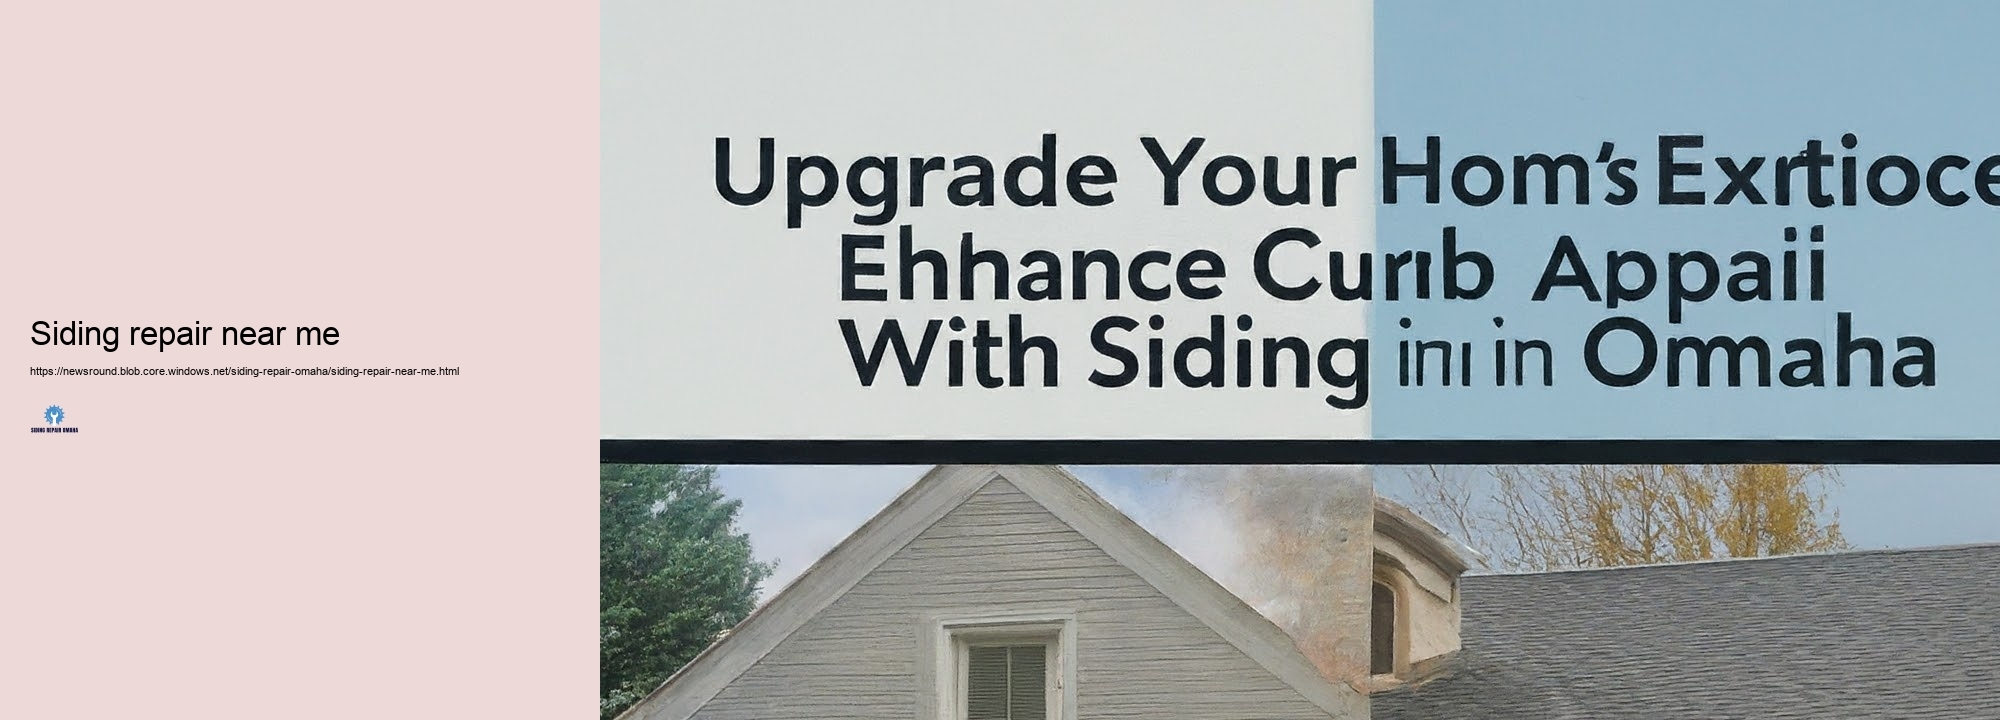 Just exactly how to Preserve Your House Home siding: Tips from Omaha Professionals